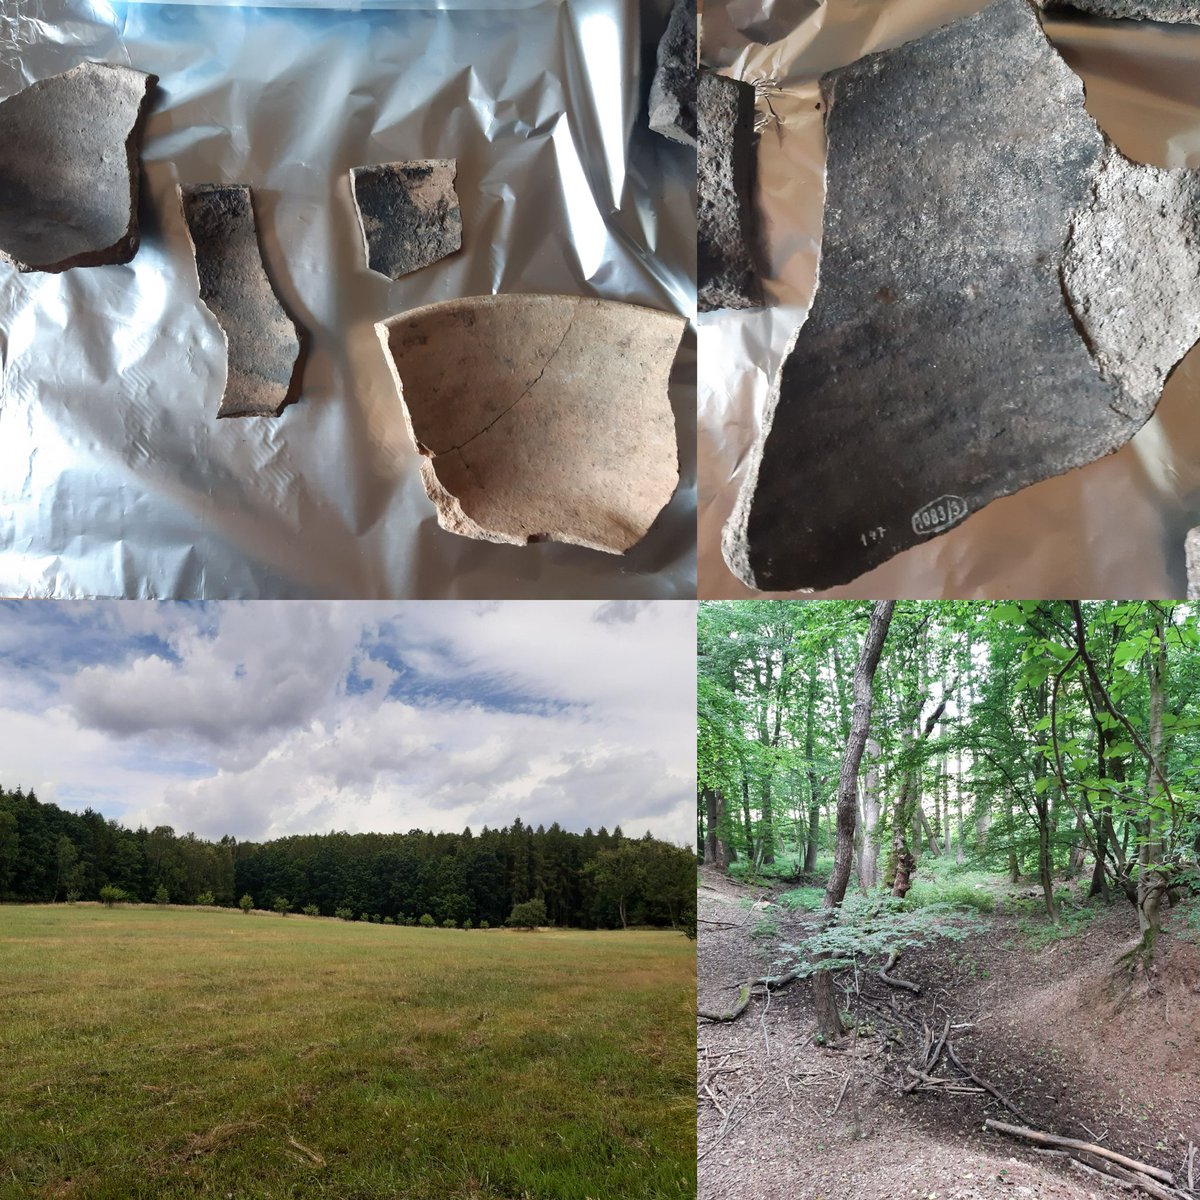 Let's explore some late medieval pottery used for collection and refinement of tar. The site itself, Krasna Dolina, is really krásná! (beautiful🙂) #organicresidues #pottery